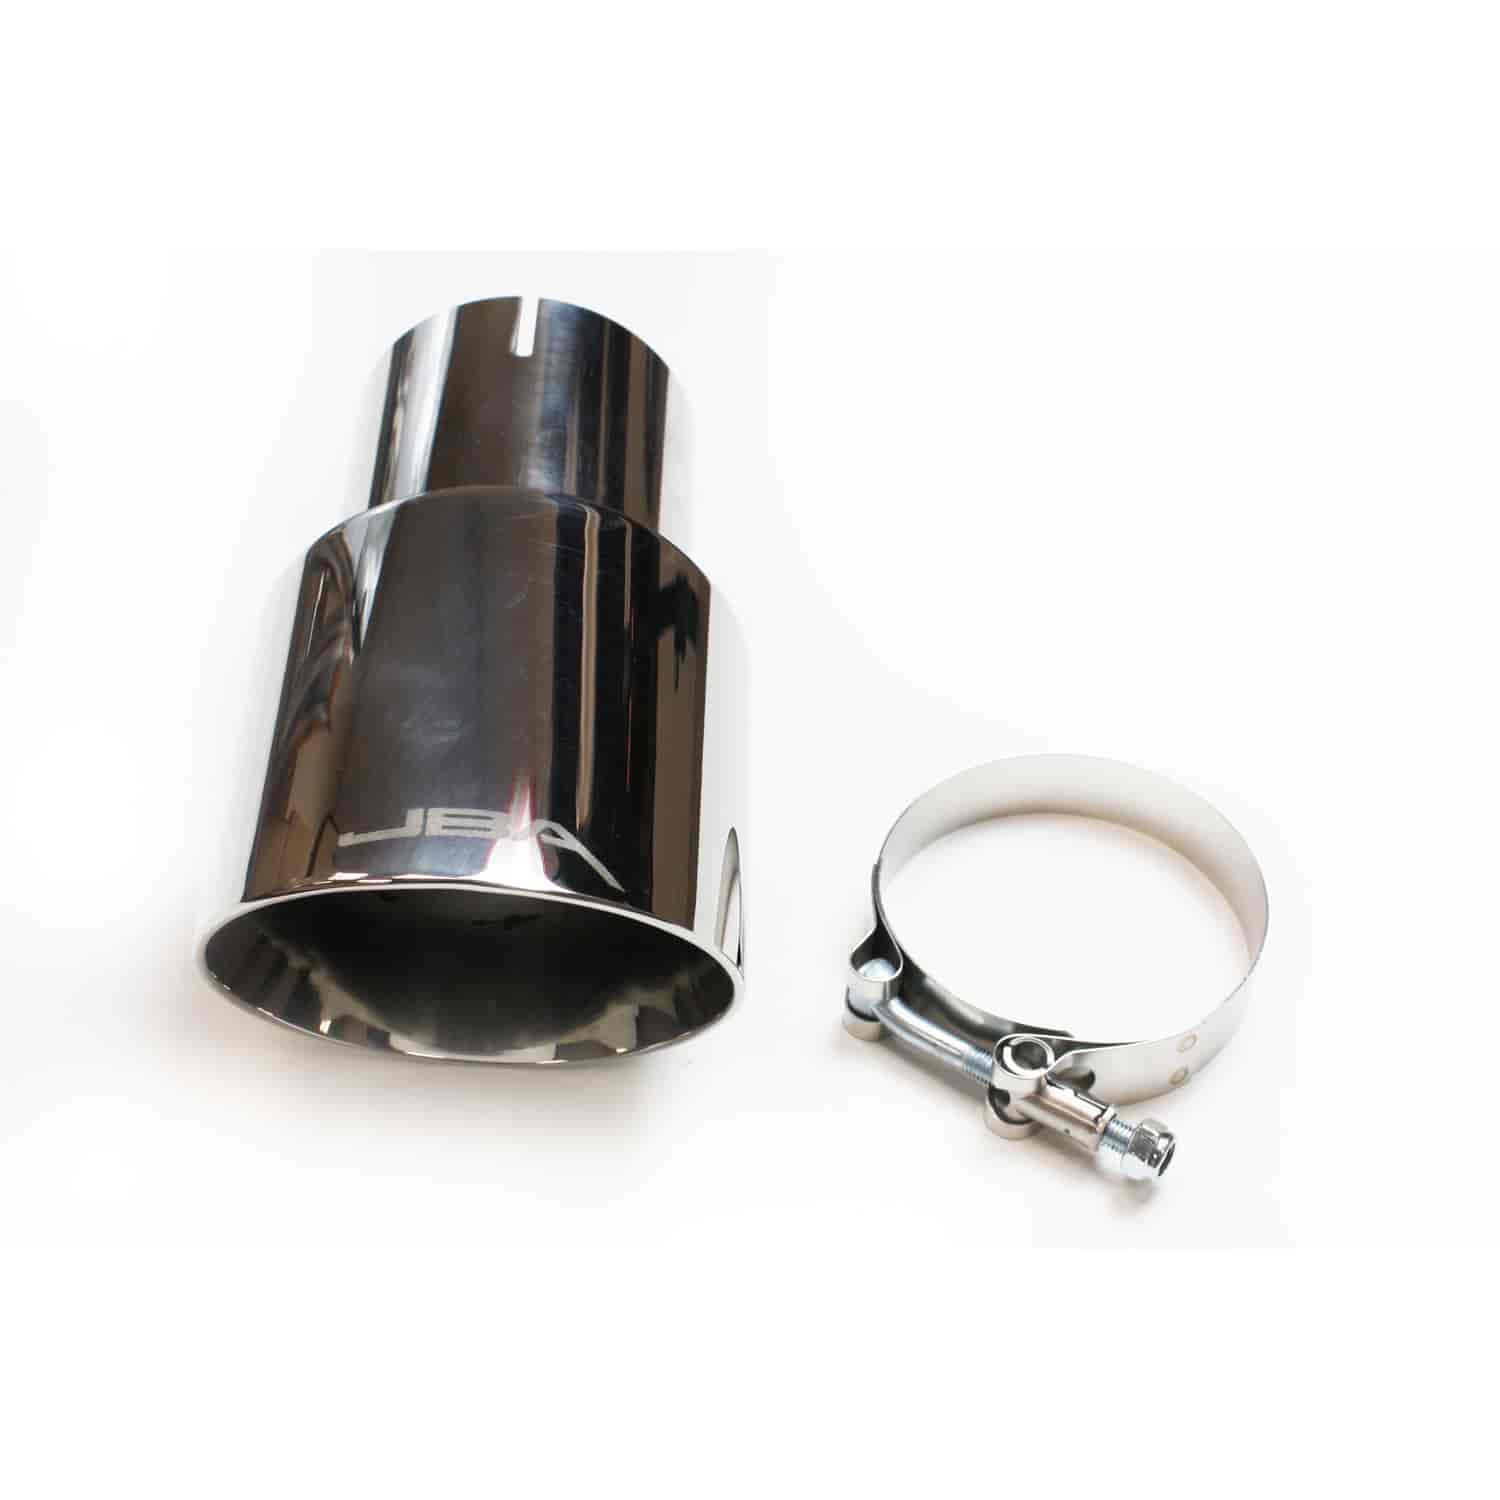 JBA Performance Exhaust 12-08272 3? x 4? x 7 1/4? Double Wall Polished S/S Chrome Tip - Clamp on